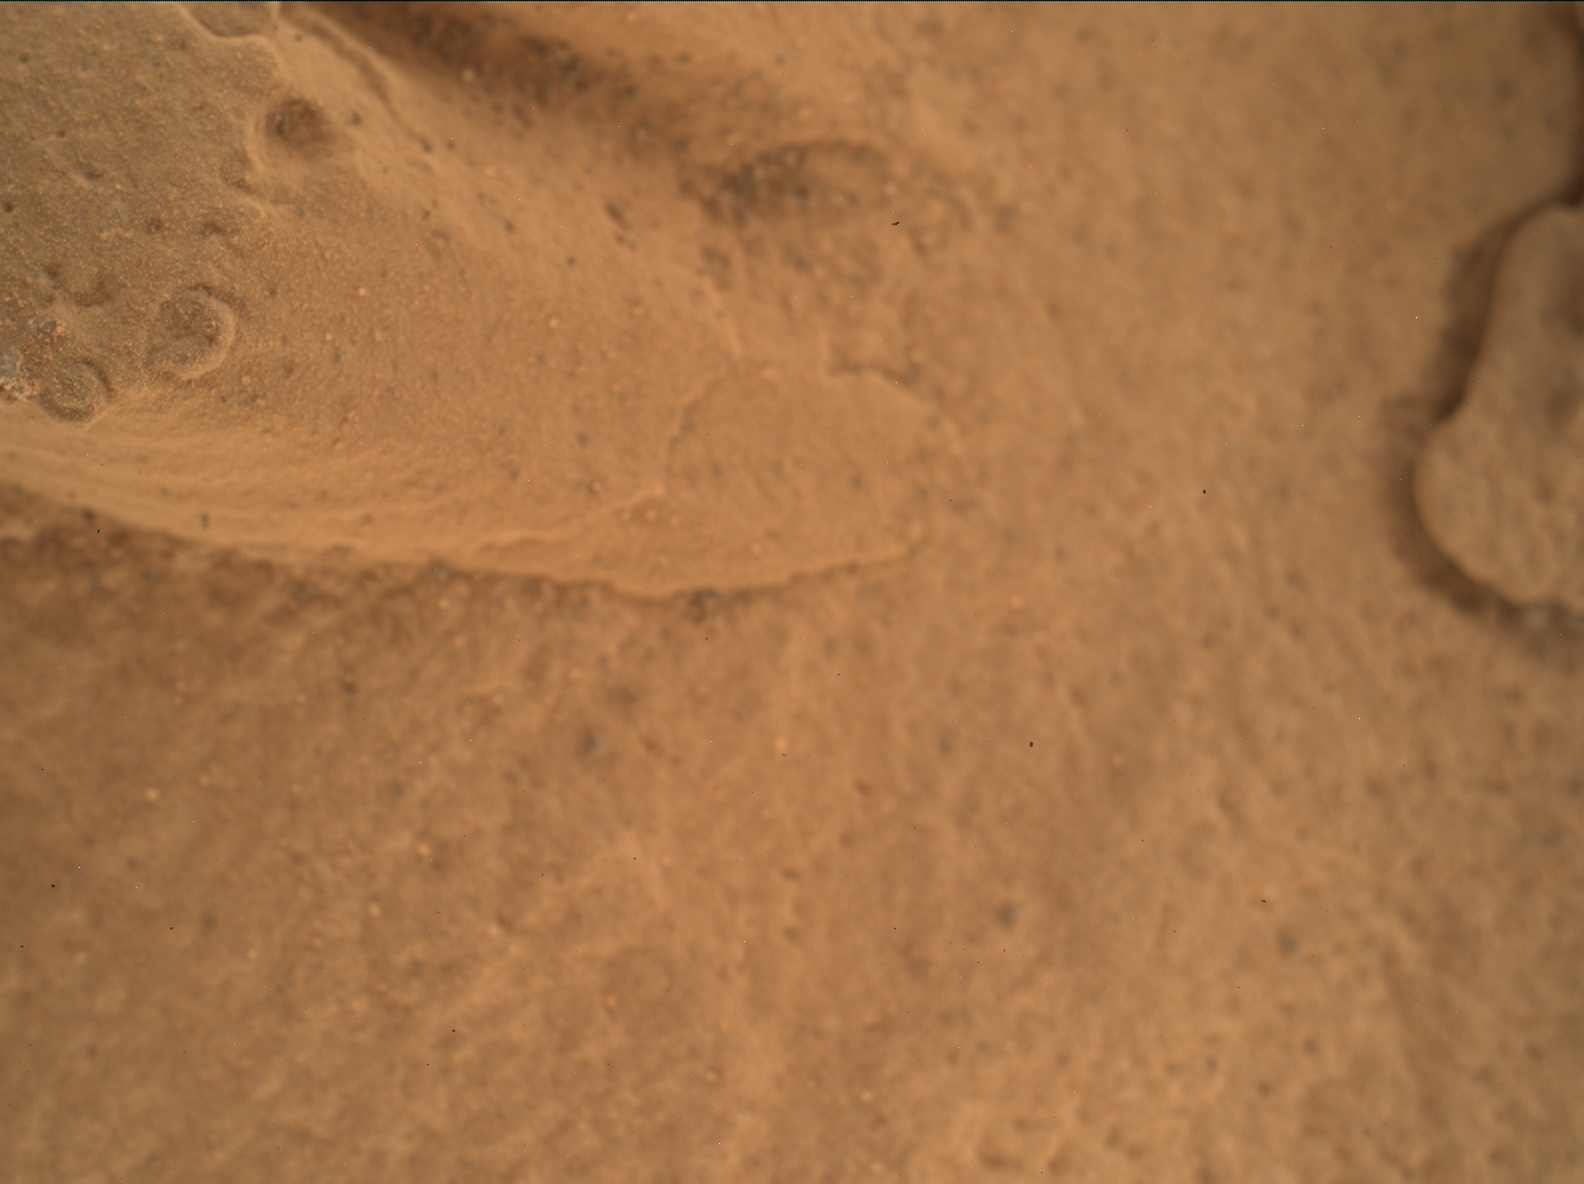 Nasa's Mars rover Curiosity acquired this image using its Mars Hand Lens Imager (MAHLI) on Sol 1748